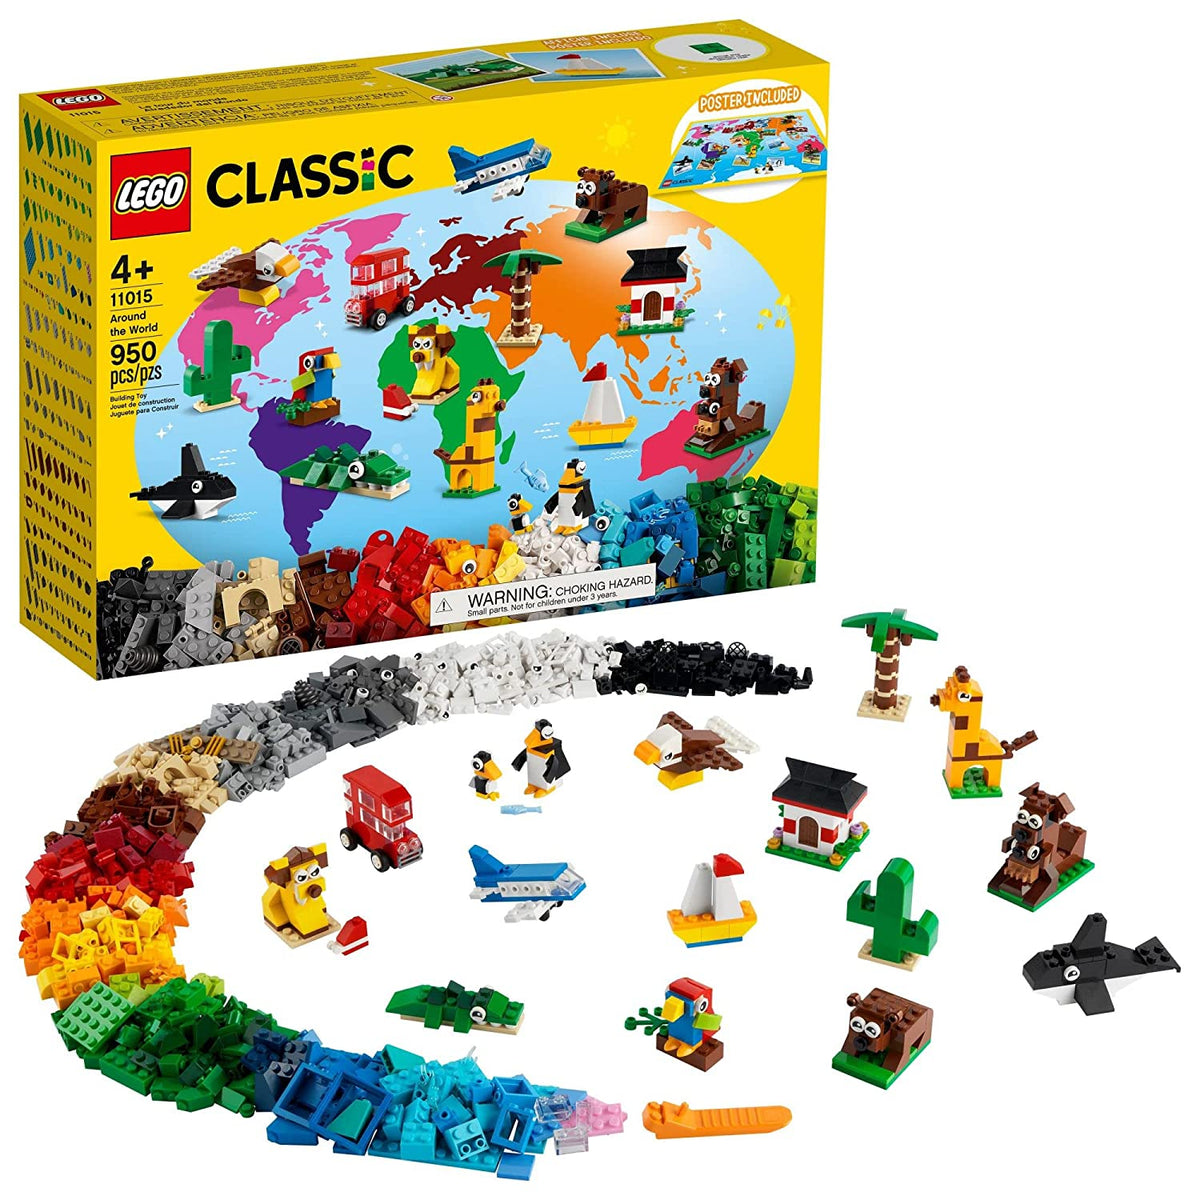 LEGO Classic Around The World with 15 Buildable Animal Figures Building Kit For Ages 4+